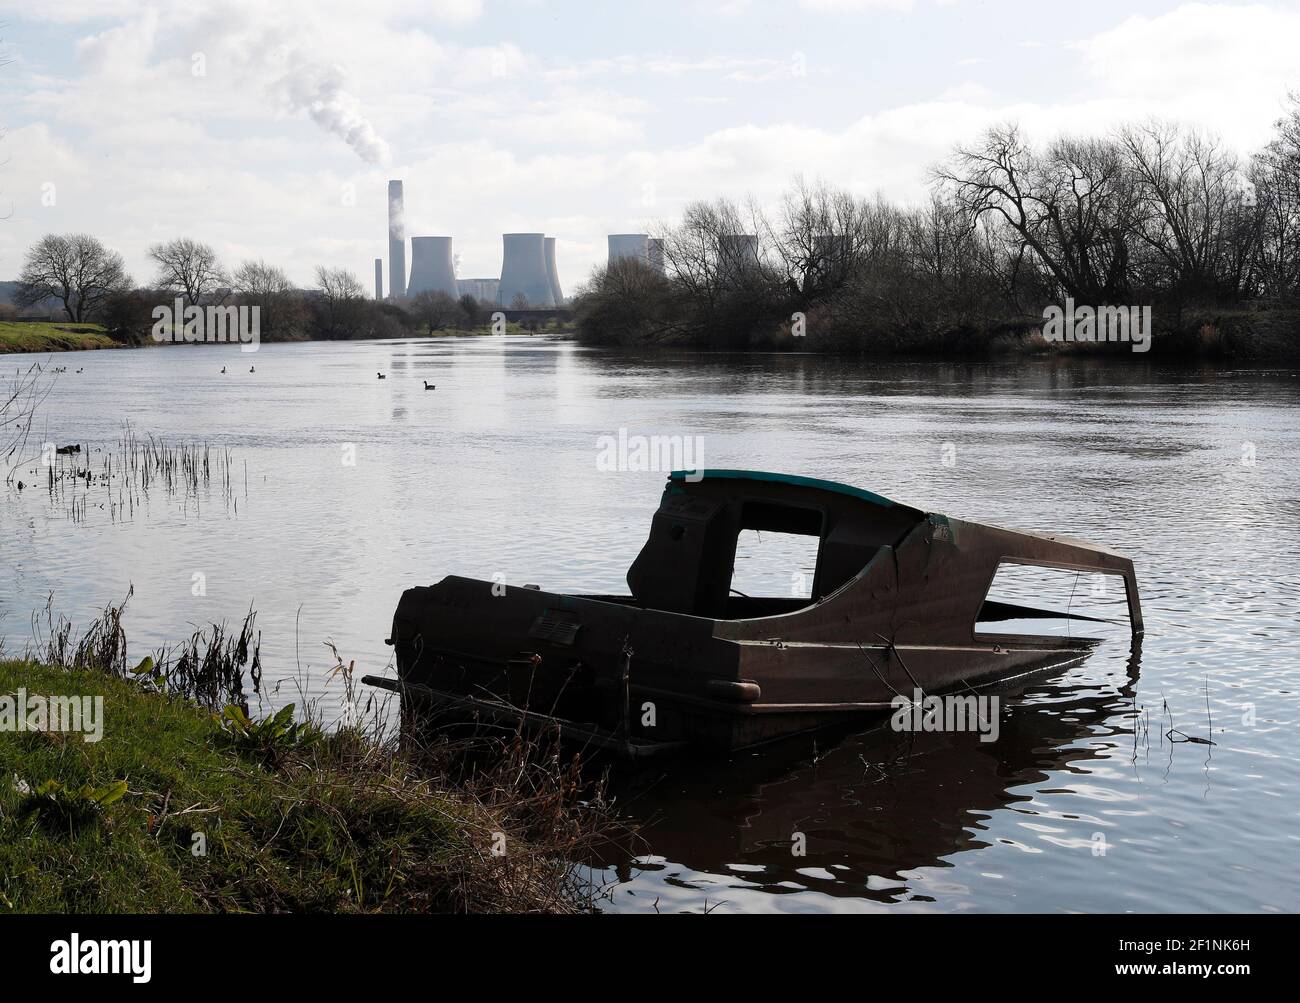 Sawley, Nottinghamshire, UK. 9th March 2021. A sunk boats sits in the River Trent near Ratcliffe-on-Soar Power Station as Rushcliffe Borough Council is to discuss an expression of interest for UniperÕs coal-powered Power Station site to accommodate a nuclear fusion reactor when it is decommissioned in 2025. Credit Darren Staples/Alamy Live News. Stock Photo